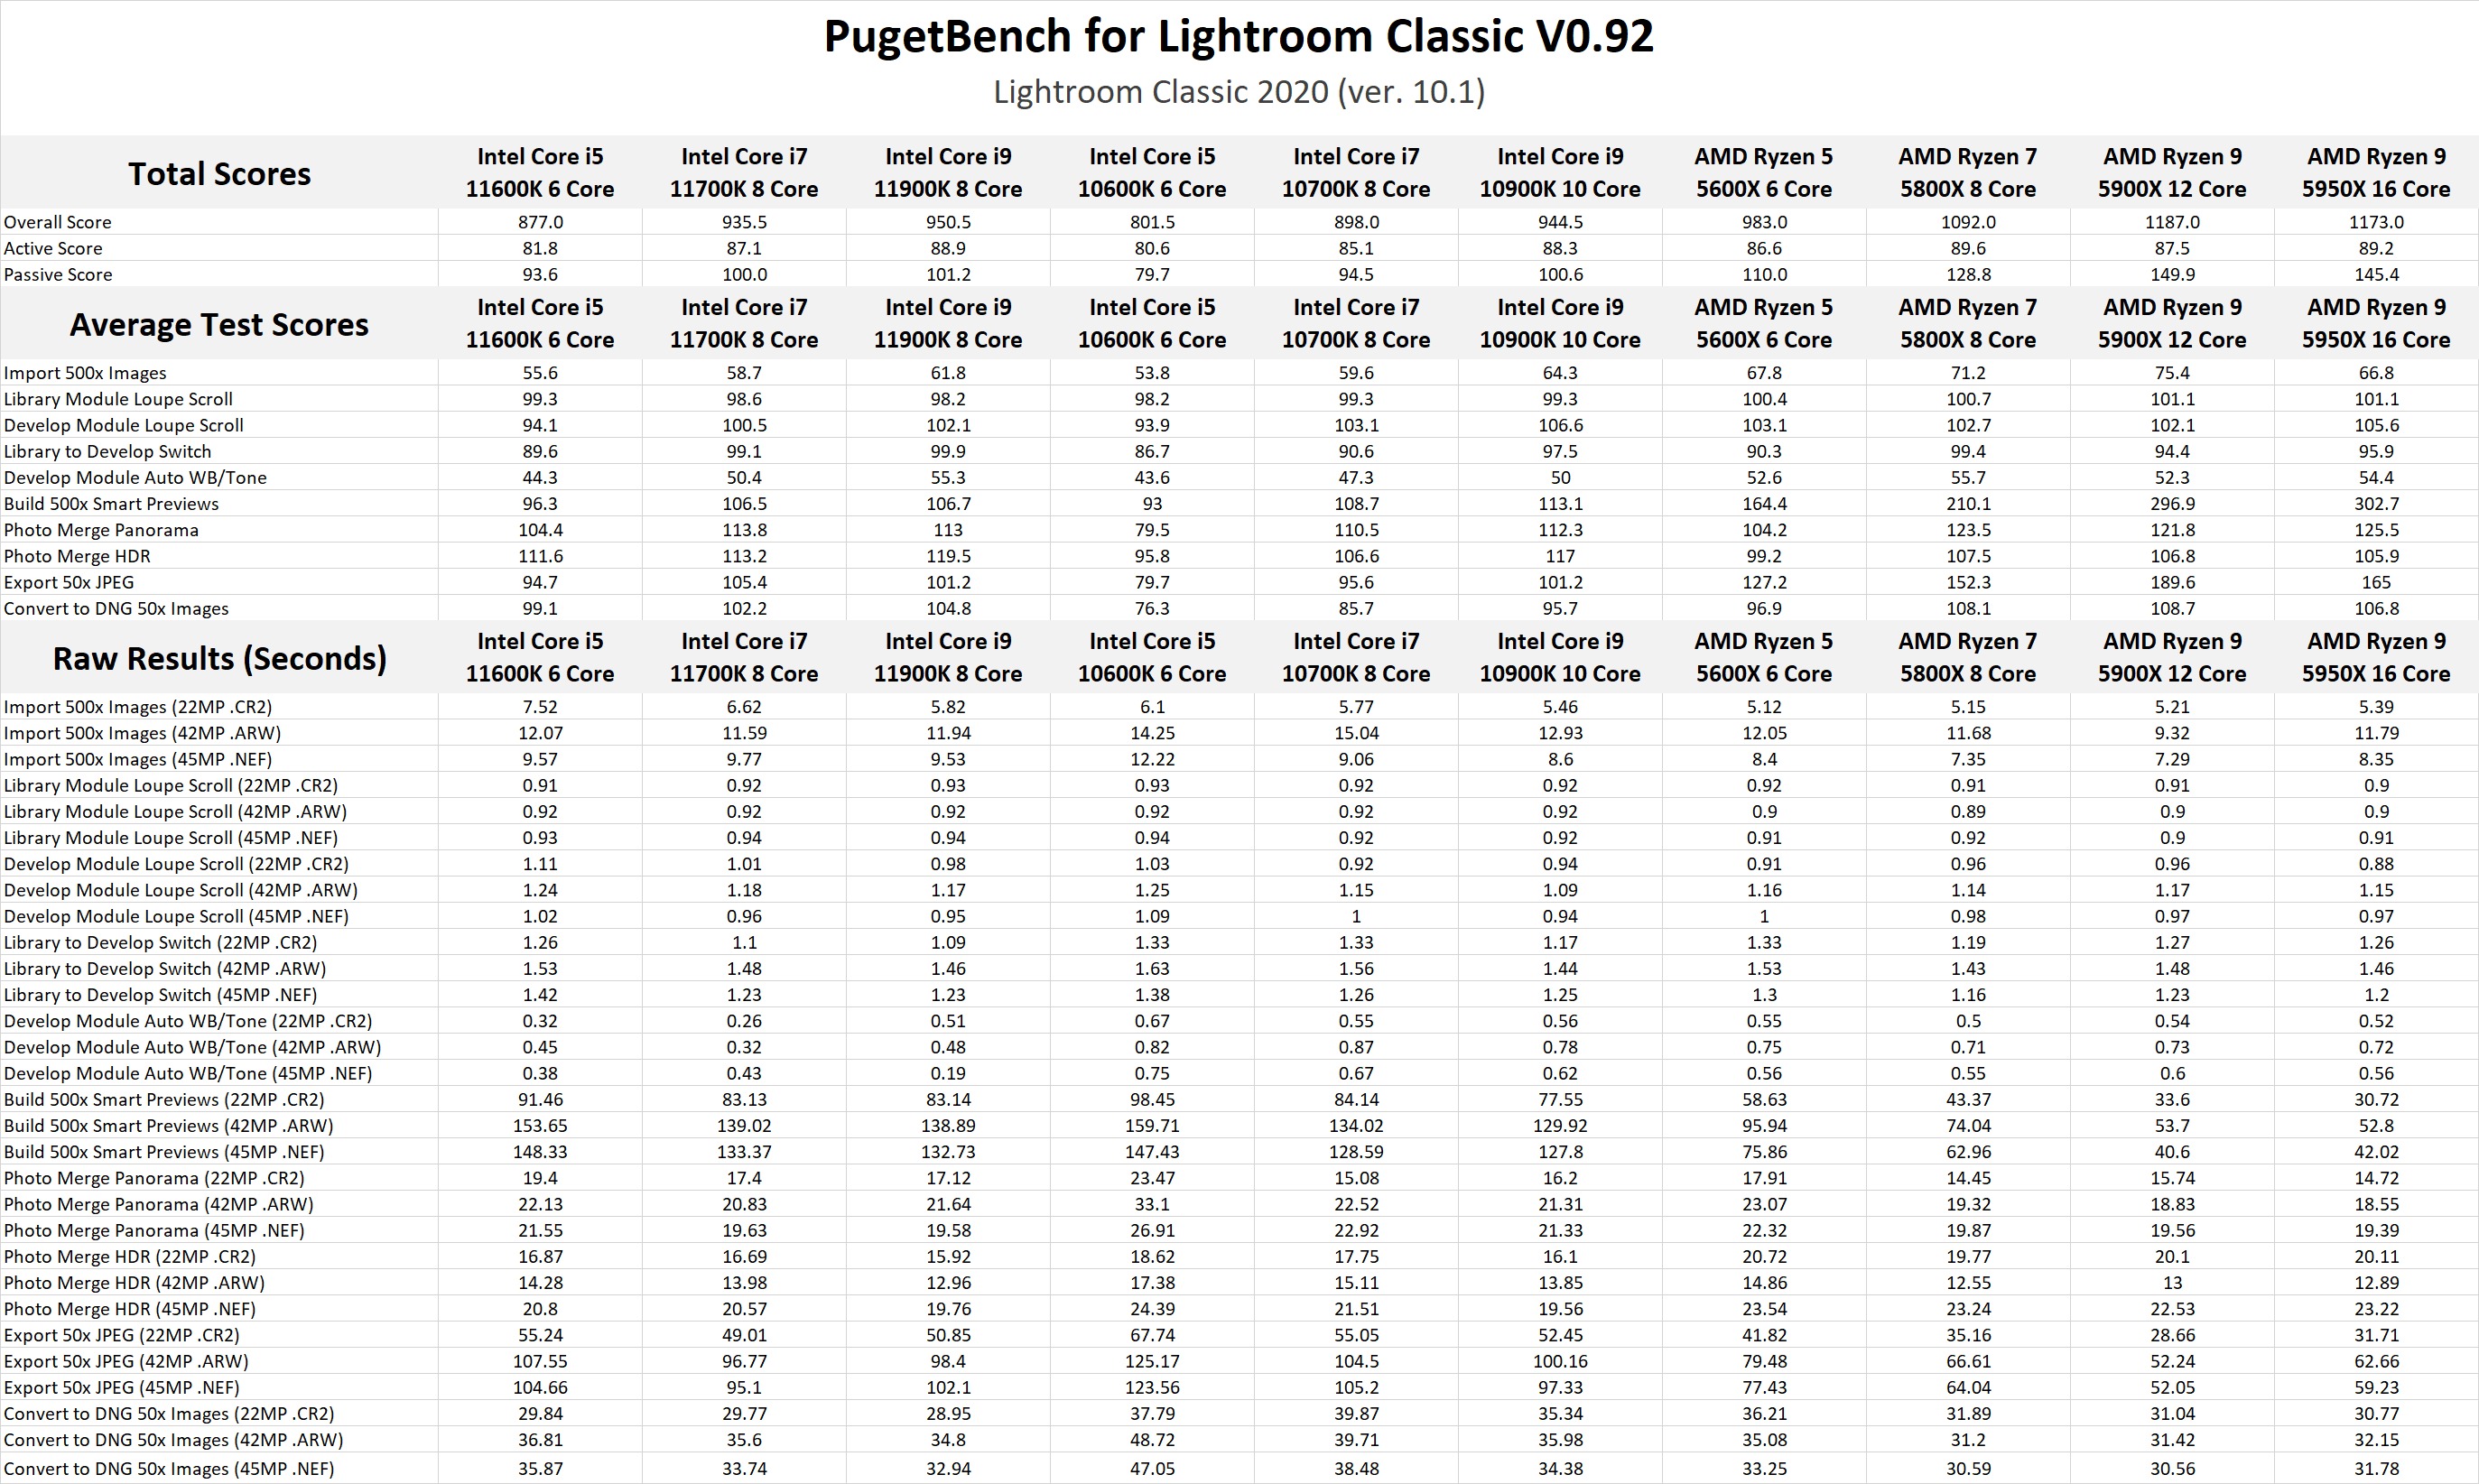 Lightroom Classic 2021 benchmark results with 11th Gen Intel Core 11900K